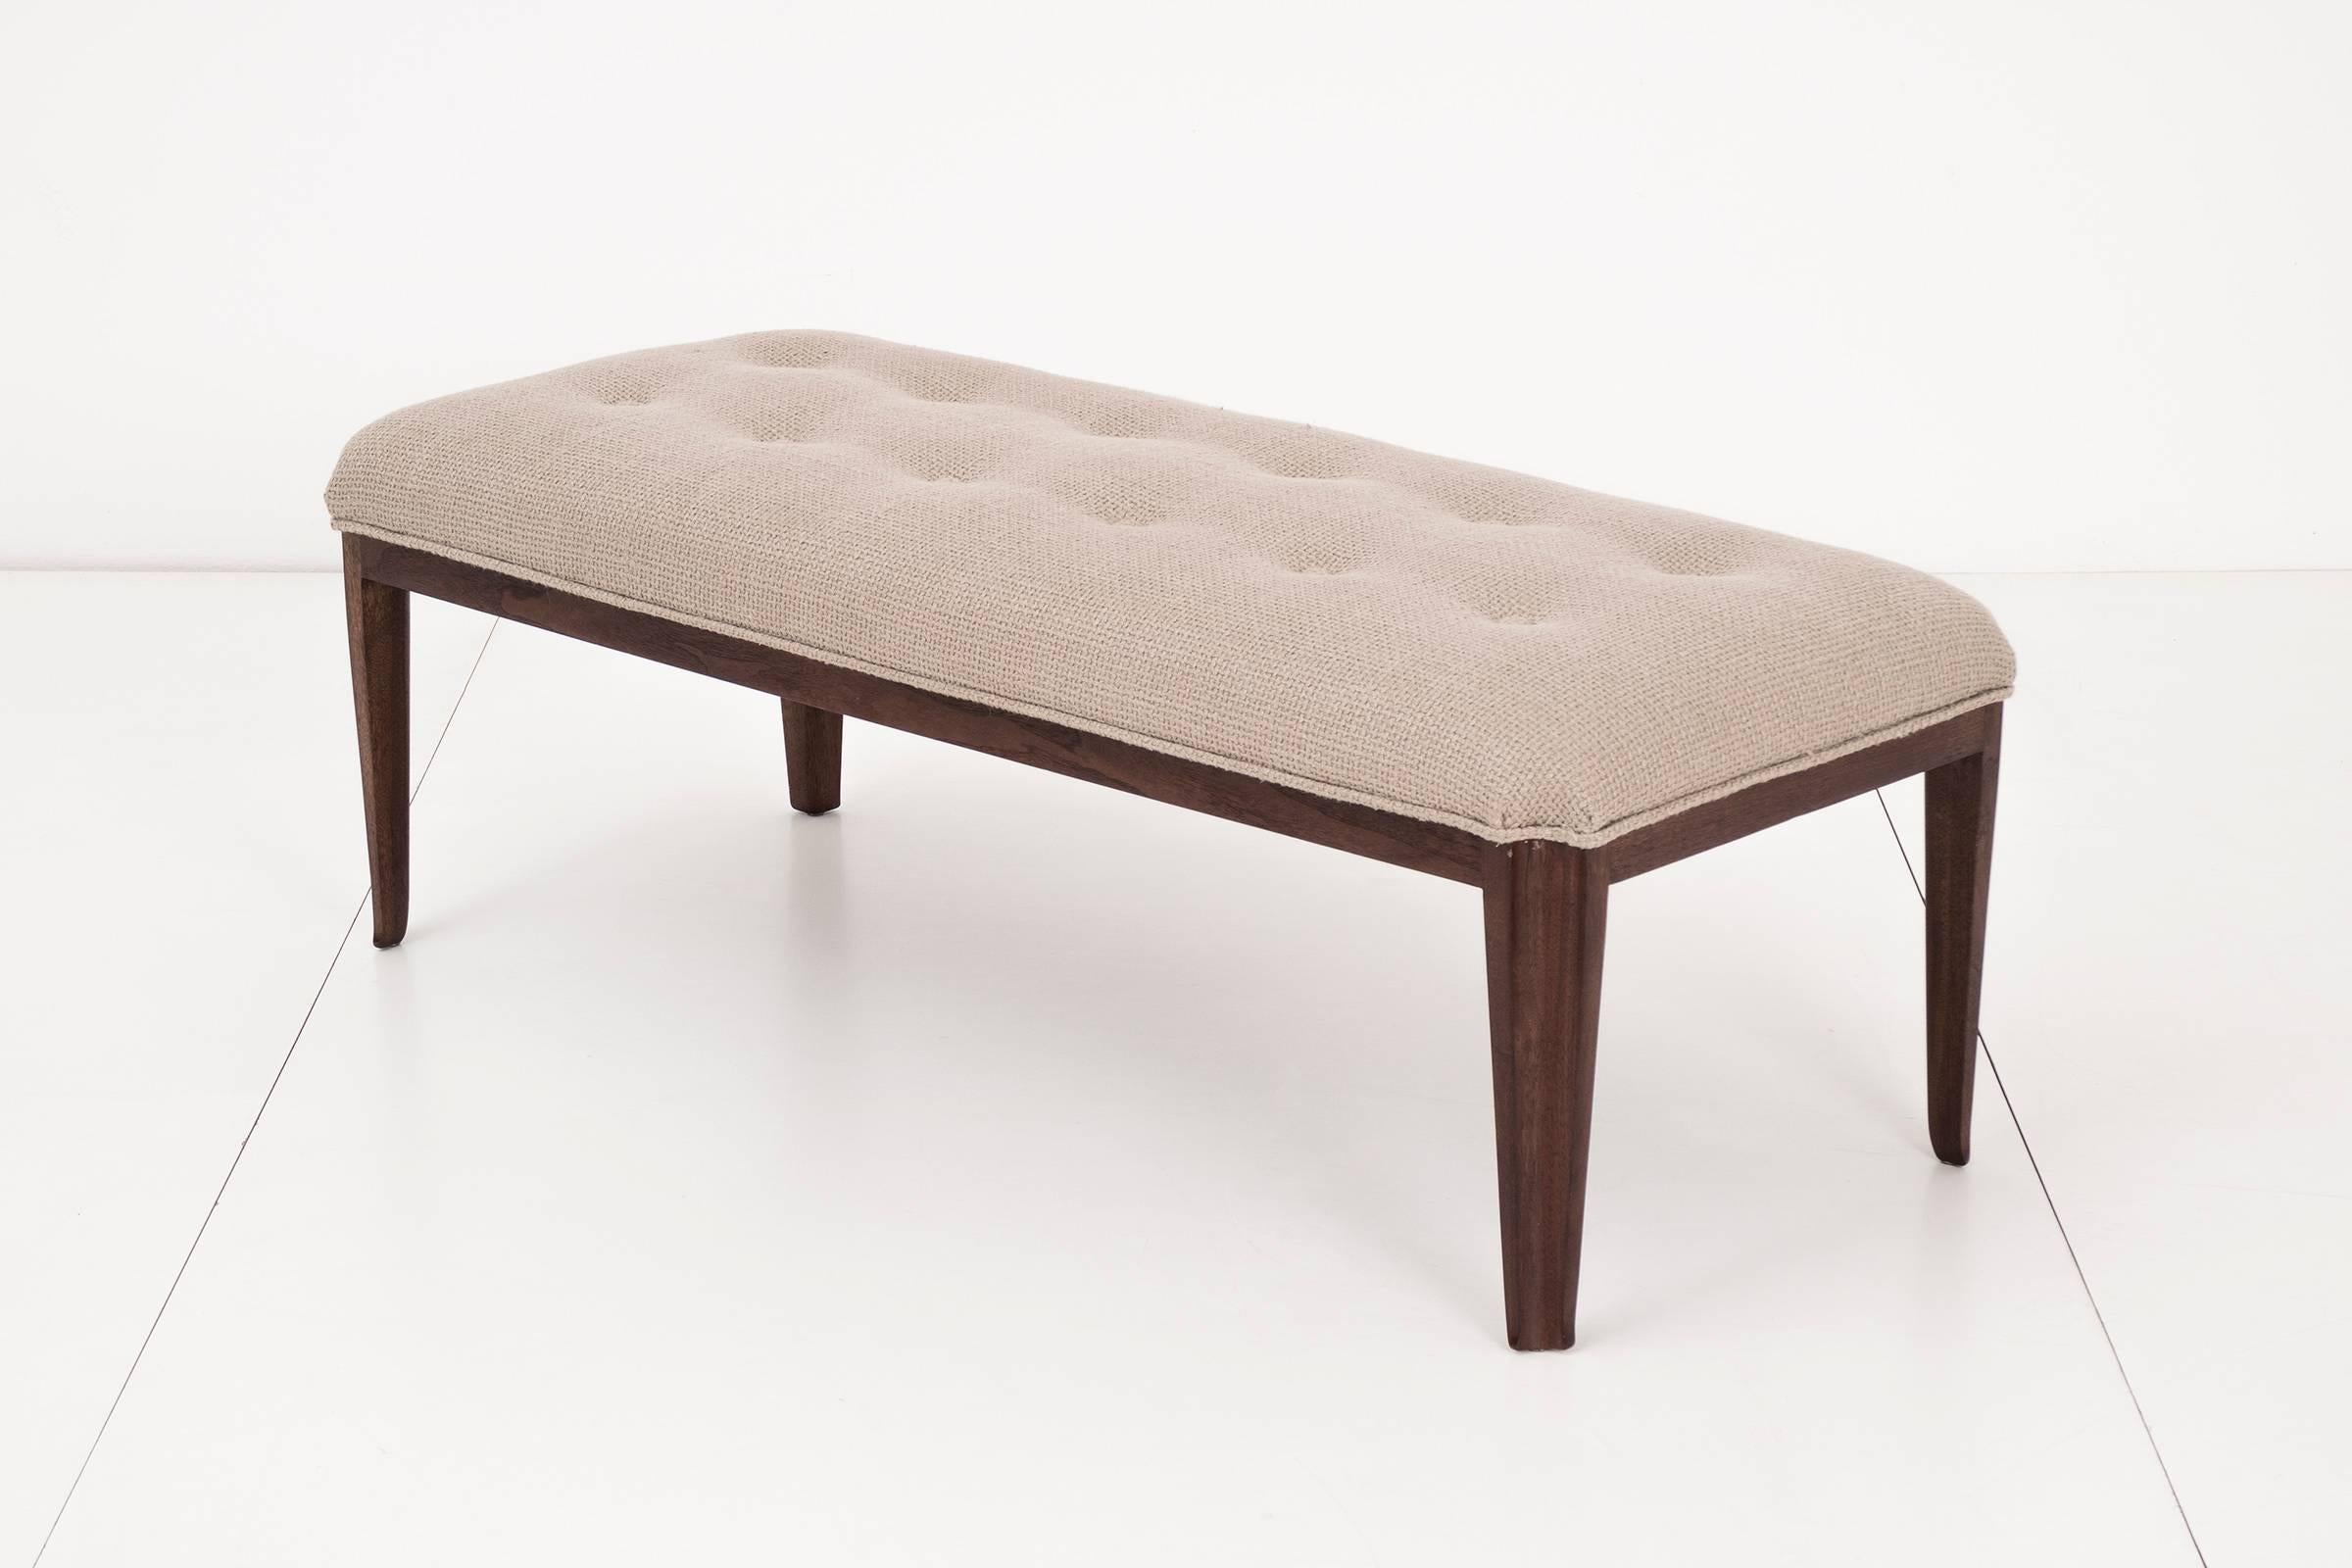 Paul Laszlo bench newly upholstered with great plains woven fabric. This piece has a solid shaped concave tapered mahogany legs and tufted cushion seat with channel seam detail around the seat.
 